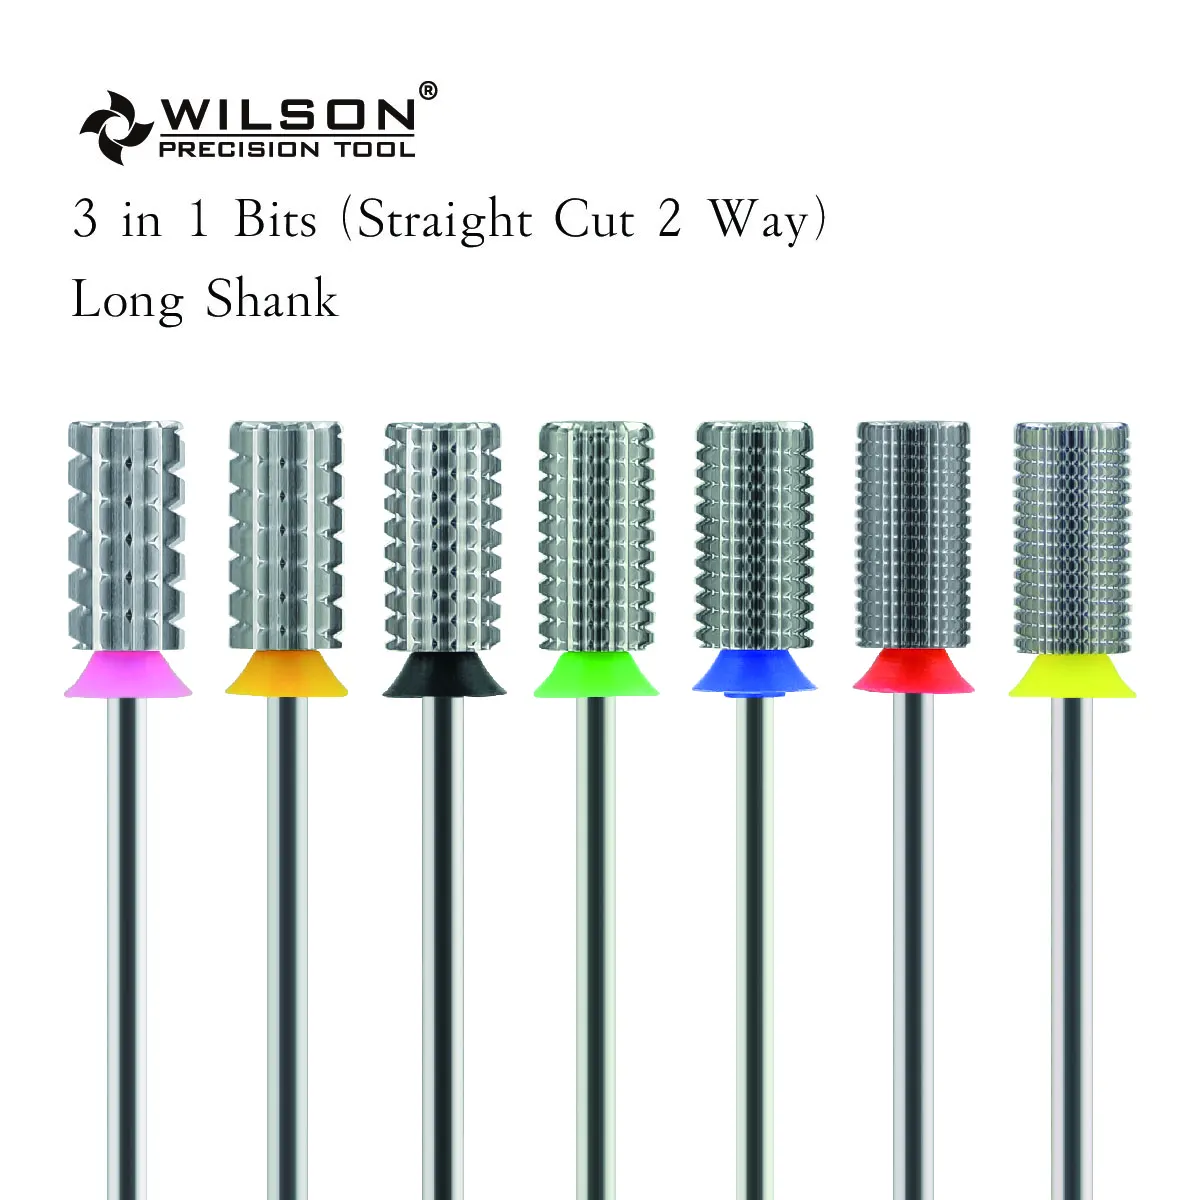 

WILSON 3 In 1 2 Way Long Shank-31.75mm Nail Drill Bits Remove gel carbide Manicure tool Manicure tool Hot sale Free shipping